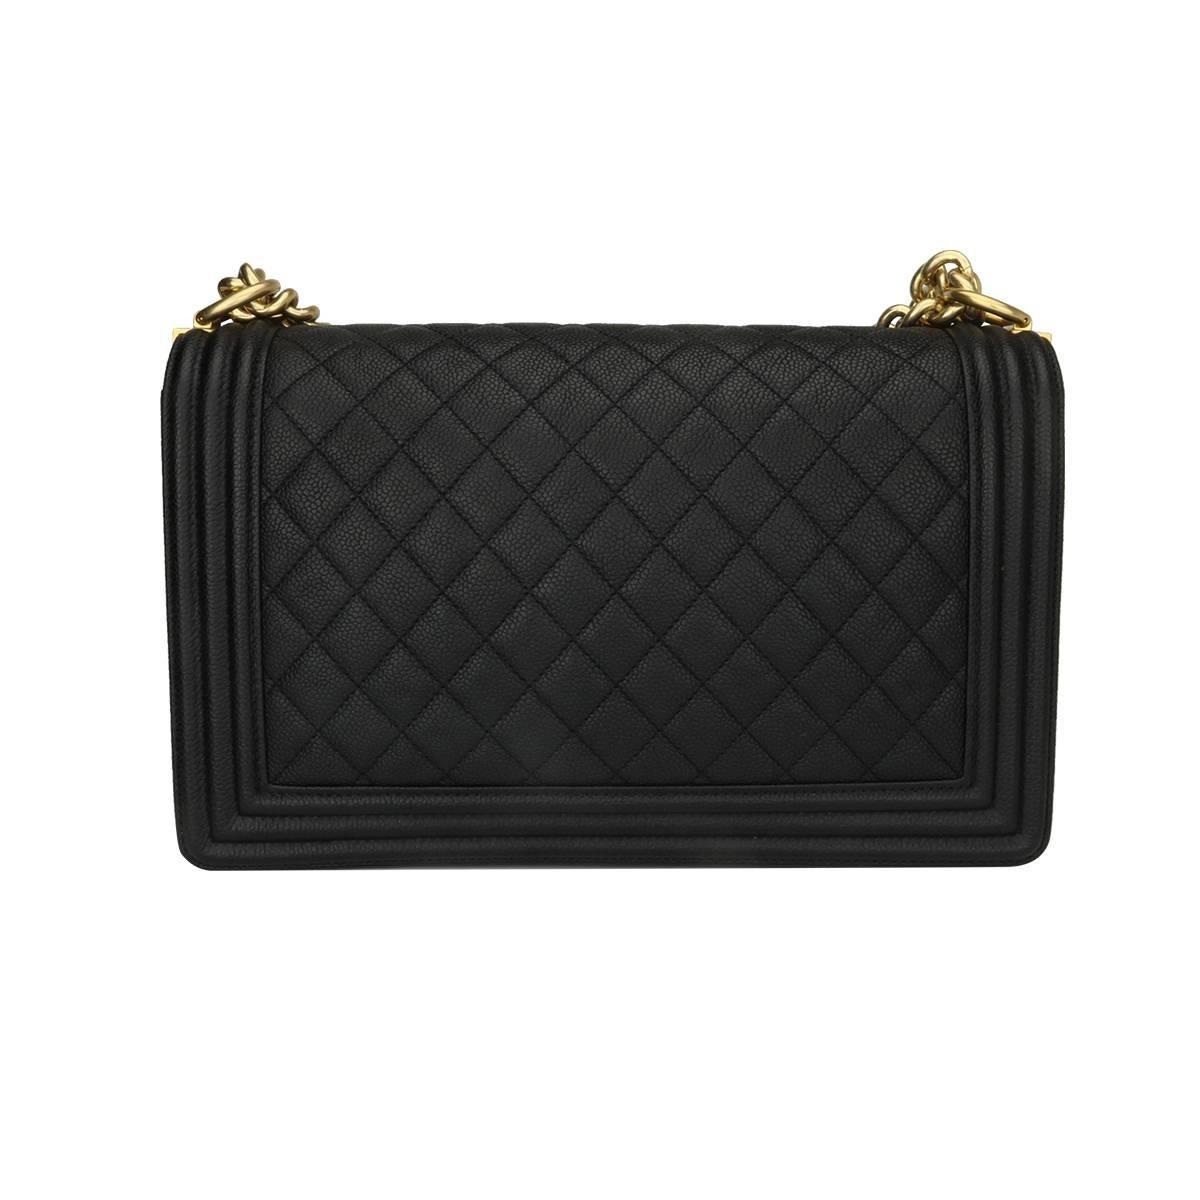 Authentic CHANEL New Medium Quilted Boy Black Caviar with Brushed Gold Hardware 2016.

This stunning bag is still in a mint condition; it still keeps its original shape well and the hardware still very shiny, leather smells fresh as if